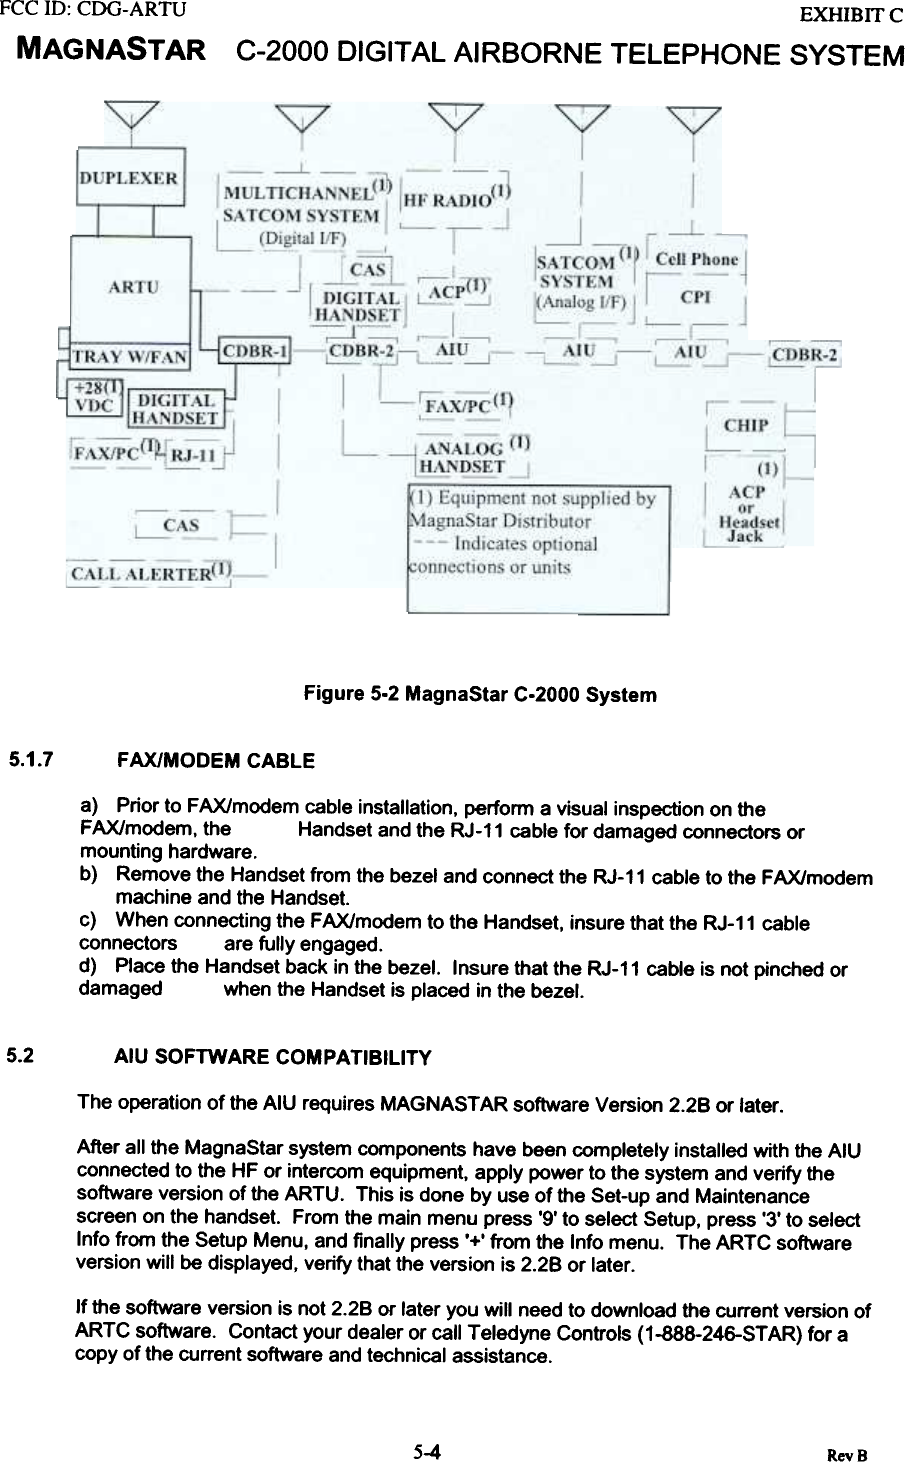 FCC ill:  CDG-ARTUMAGNASTAR EXHIBIT CC-2000  DIGITAL AIRBORNE  TELEPHONE  SYSTEMFigure 5-2 MagnaStar C-2000 System5.1.7 FAX/MODEM CABLEa)  Prior to FAX/modem cable installation, perform a visual inspection on theFAX/modem, the  Handset and the RJ-11 cable for damaged connectors ormounting hardware.b)  Remove the Handset from the bezel and connect the RJ-11 cable to the FAX/modemmachine and the Handset.c)  When connecting the FAX/modem to the Handset, insure that the RJ-11 cableconnectors  are fully engaged.d)  Place the Handset back in the bezel.  Insure that the RJ-11 cable is not pinched ordamaged  when the Handset is placed in the bezel.5.2 AIU SOFTWARE COMPATIBILITYThe operation of the AIU requires MAGNAST AR software Version 2.28 or later.After  all the  MagnaStar  system  components  have  been completely  installed  with the AIUconnected  to the  HF or intercom  equipment.  apply  power  to the system  and verify  thesoftware  version  of the ARTU.  This  is done  by use of the Set-up  and  Maintenancescreen  on the  handset.  From the main  menu  press  &apos;9&apos; to select  Setup,  press  &apos;3&apos; to selectInfo from  the  Setup  Menu,  and finally  press  &apos;+&apos; from  the  Info menu.  The  ARTC  softwareversion  will  be displayed,  verify  that the  version  is 2.28  or later.If the software  version  is not 2.28  or later  you will  need to download  the current  version  ofARTC  software.  Contact  your  dealer  or call Teledyne  Controls  (1-888-246-STAR)  for acopy  of the current  software  and technical  assistance.5-4 RevB